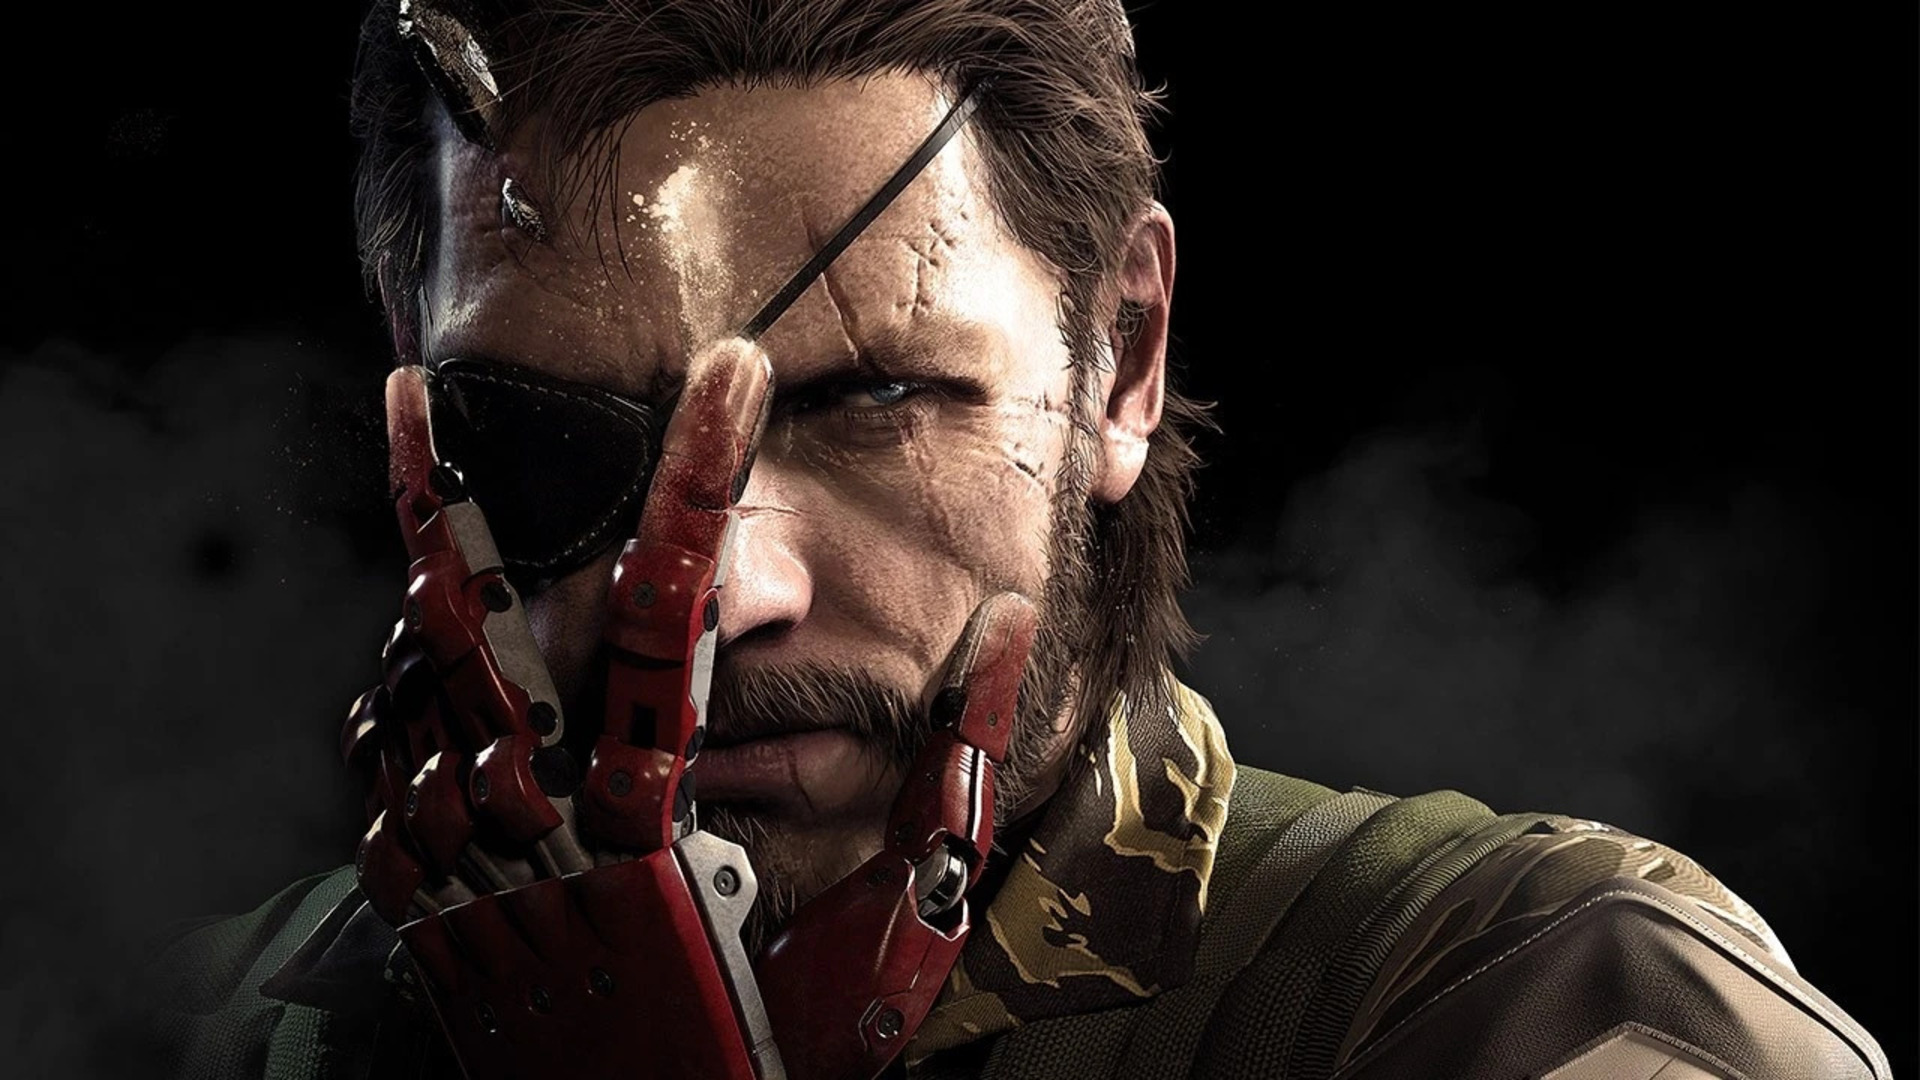 Venom Snake looks into the camera with his red hand covering part of his face